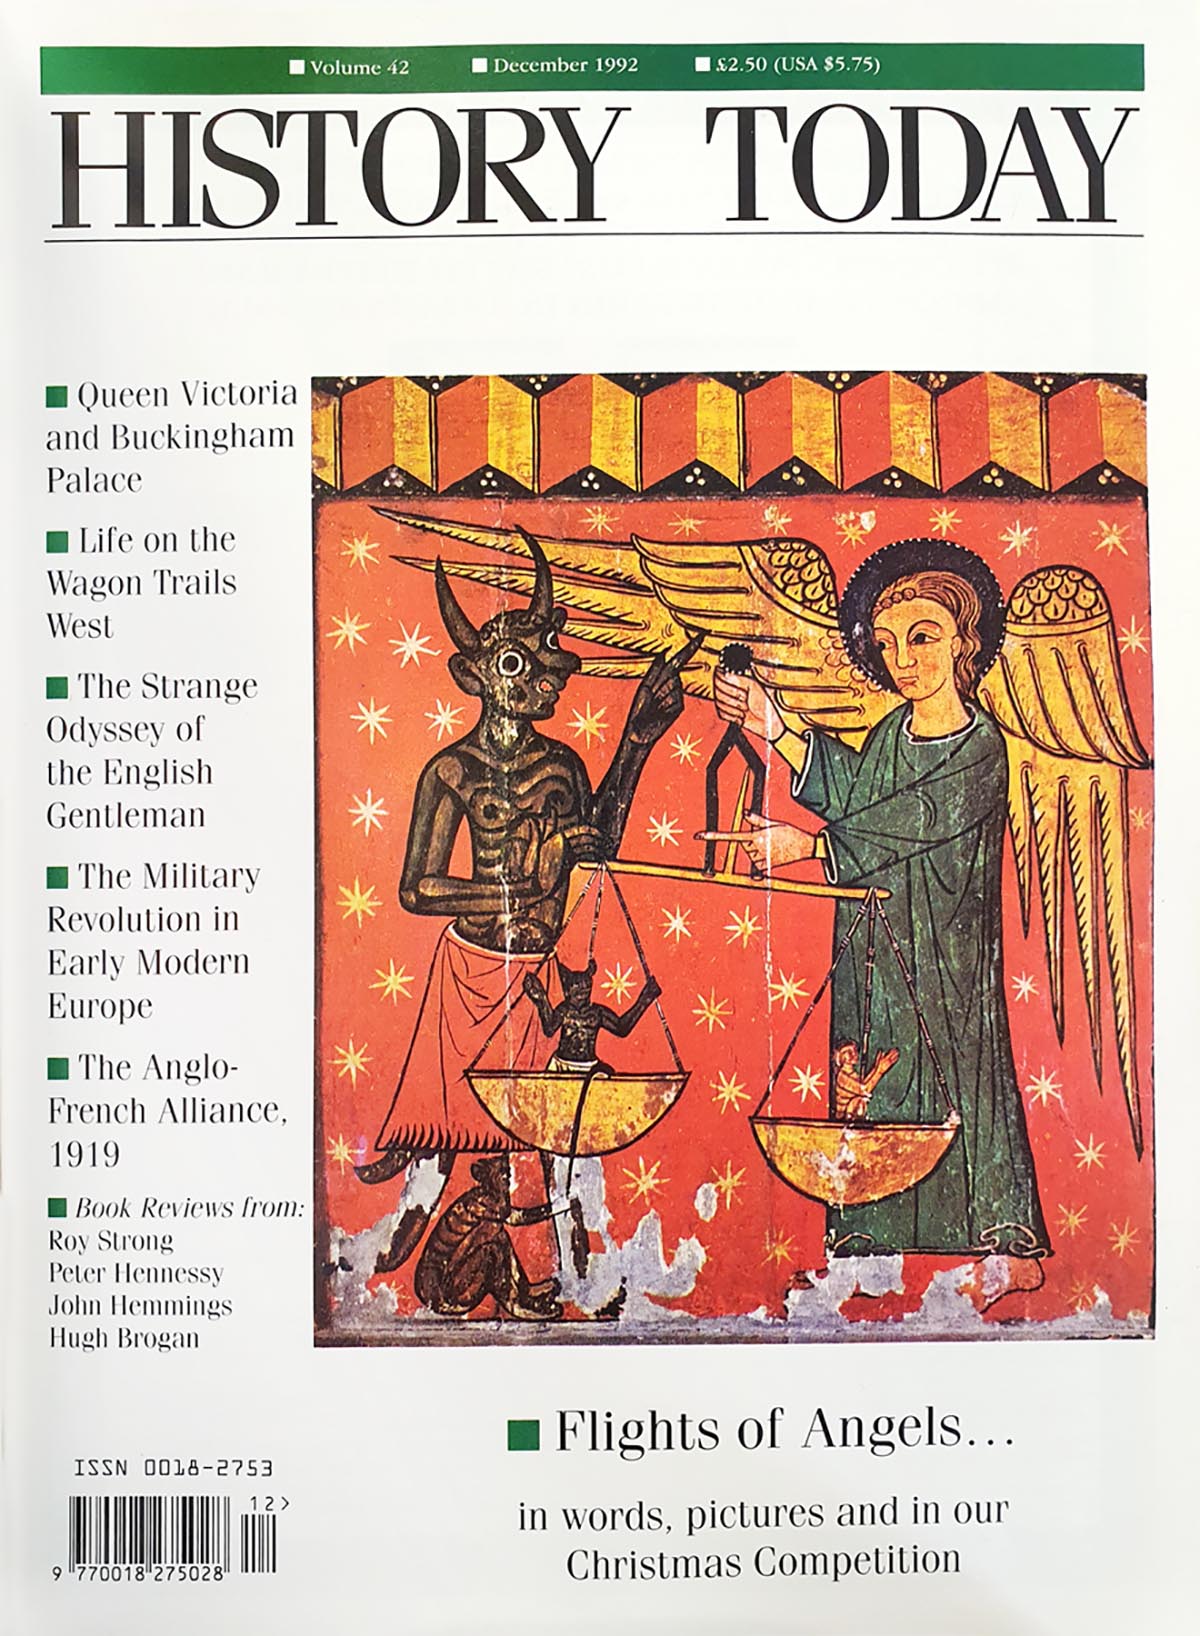 History Today Magazine Volume 42 May 1992 Columbus New Worlds For Old 